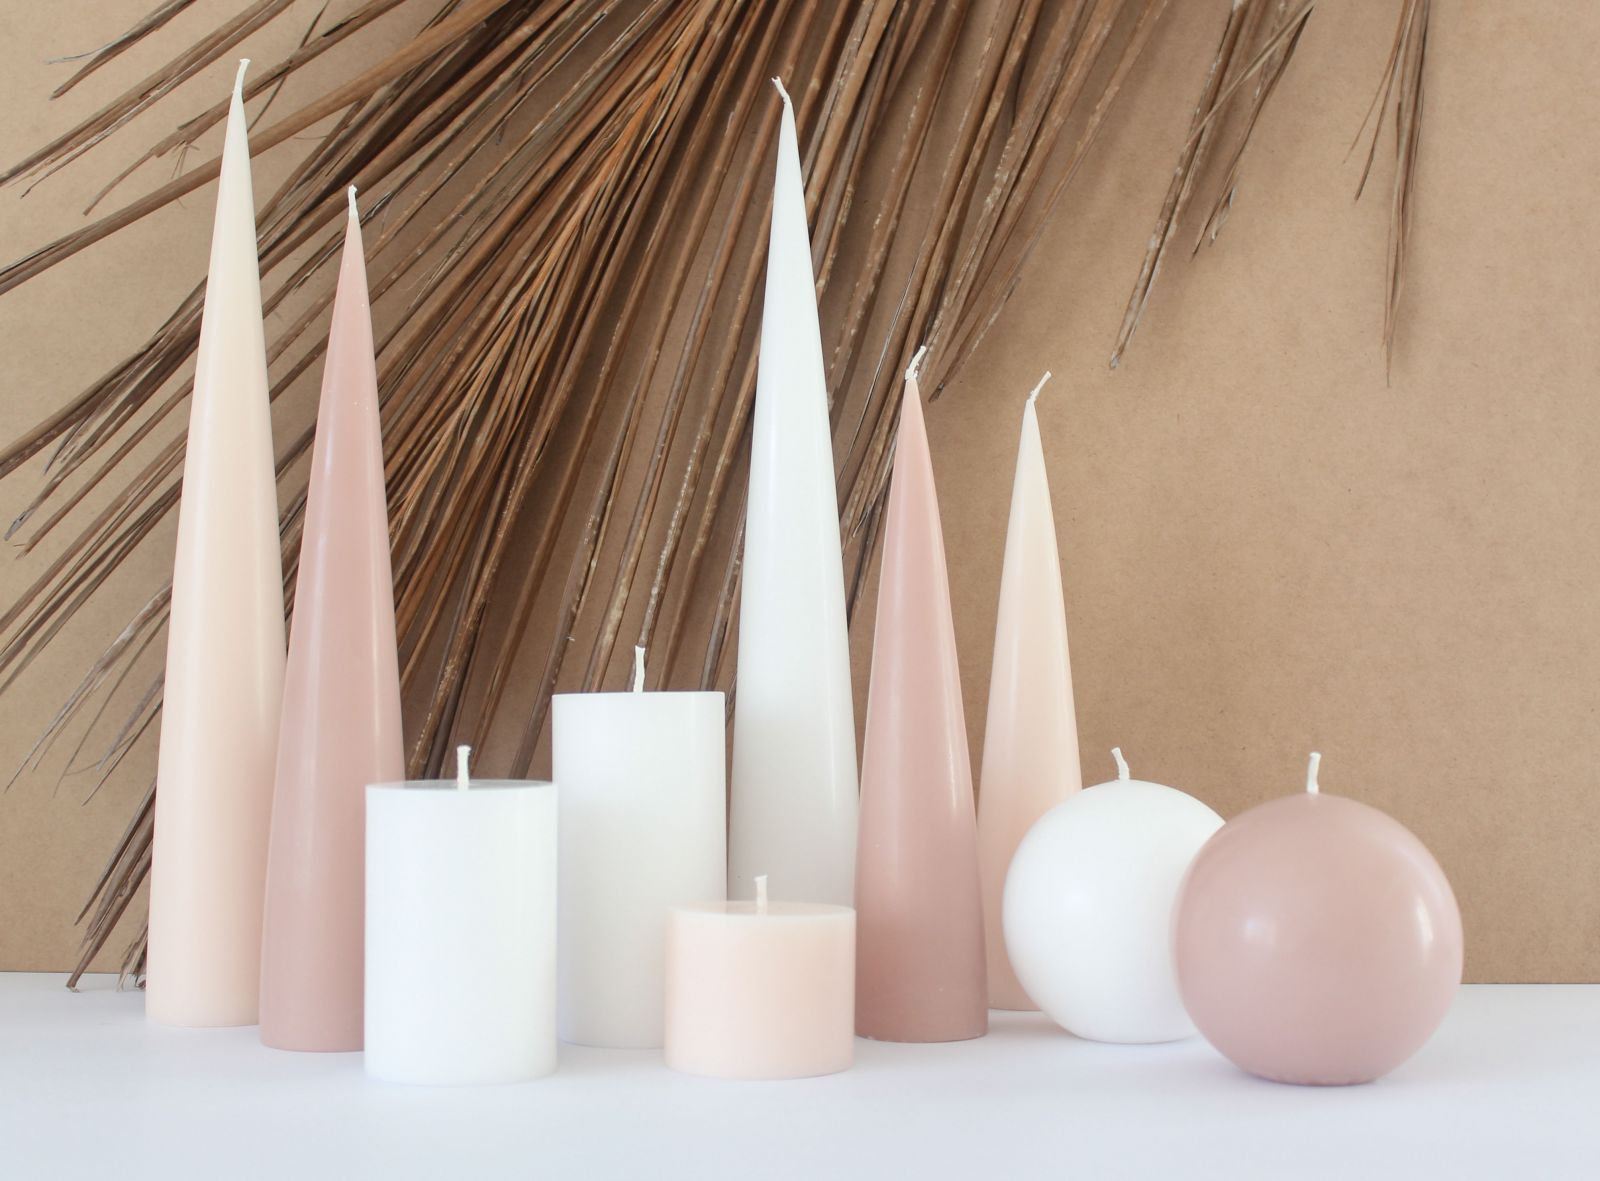 image of cone candles with ball candles and pillar candles in shades of taupe, nude and white